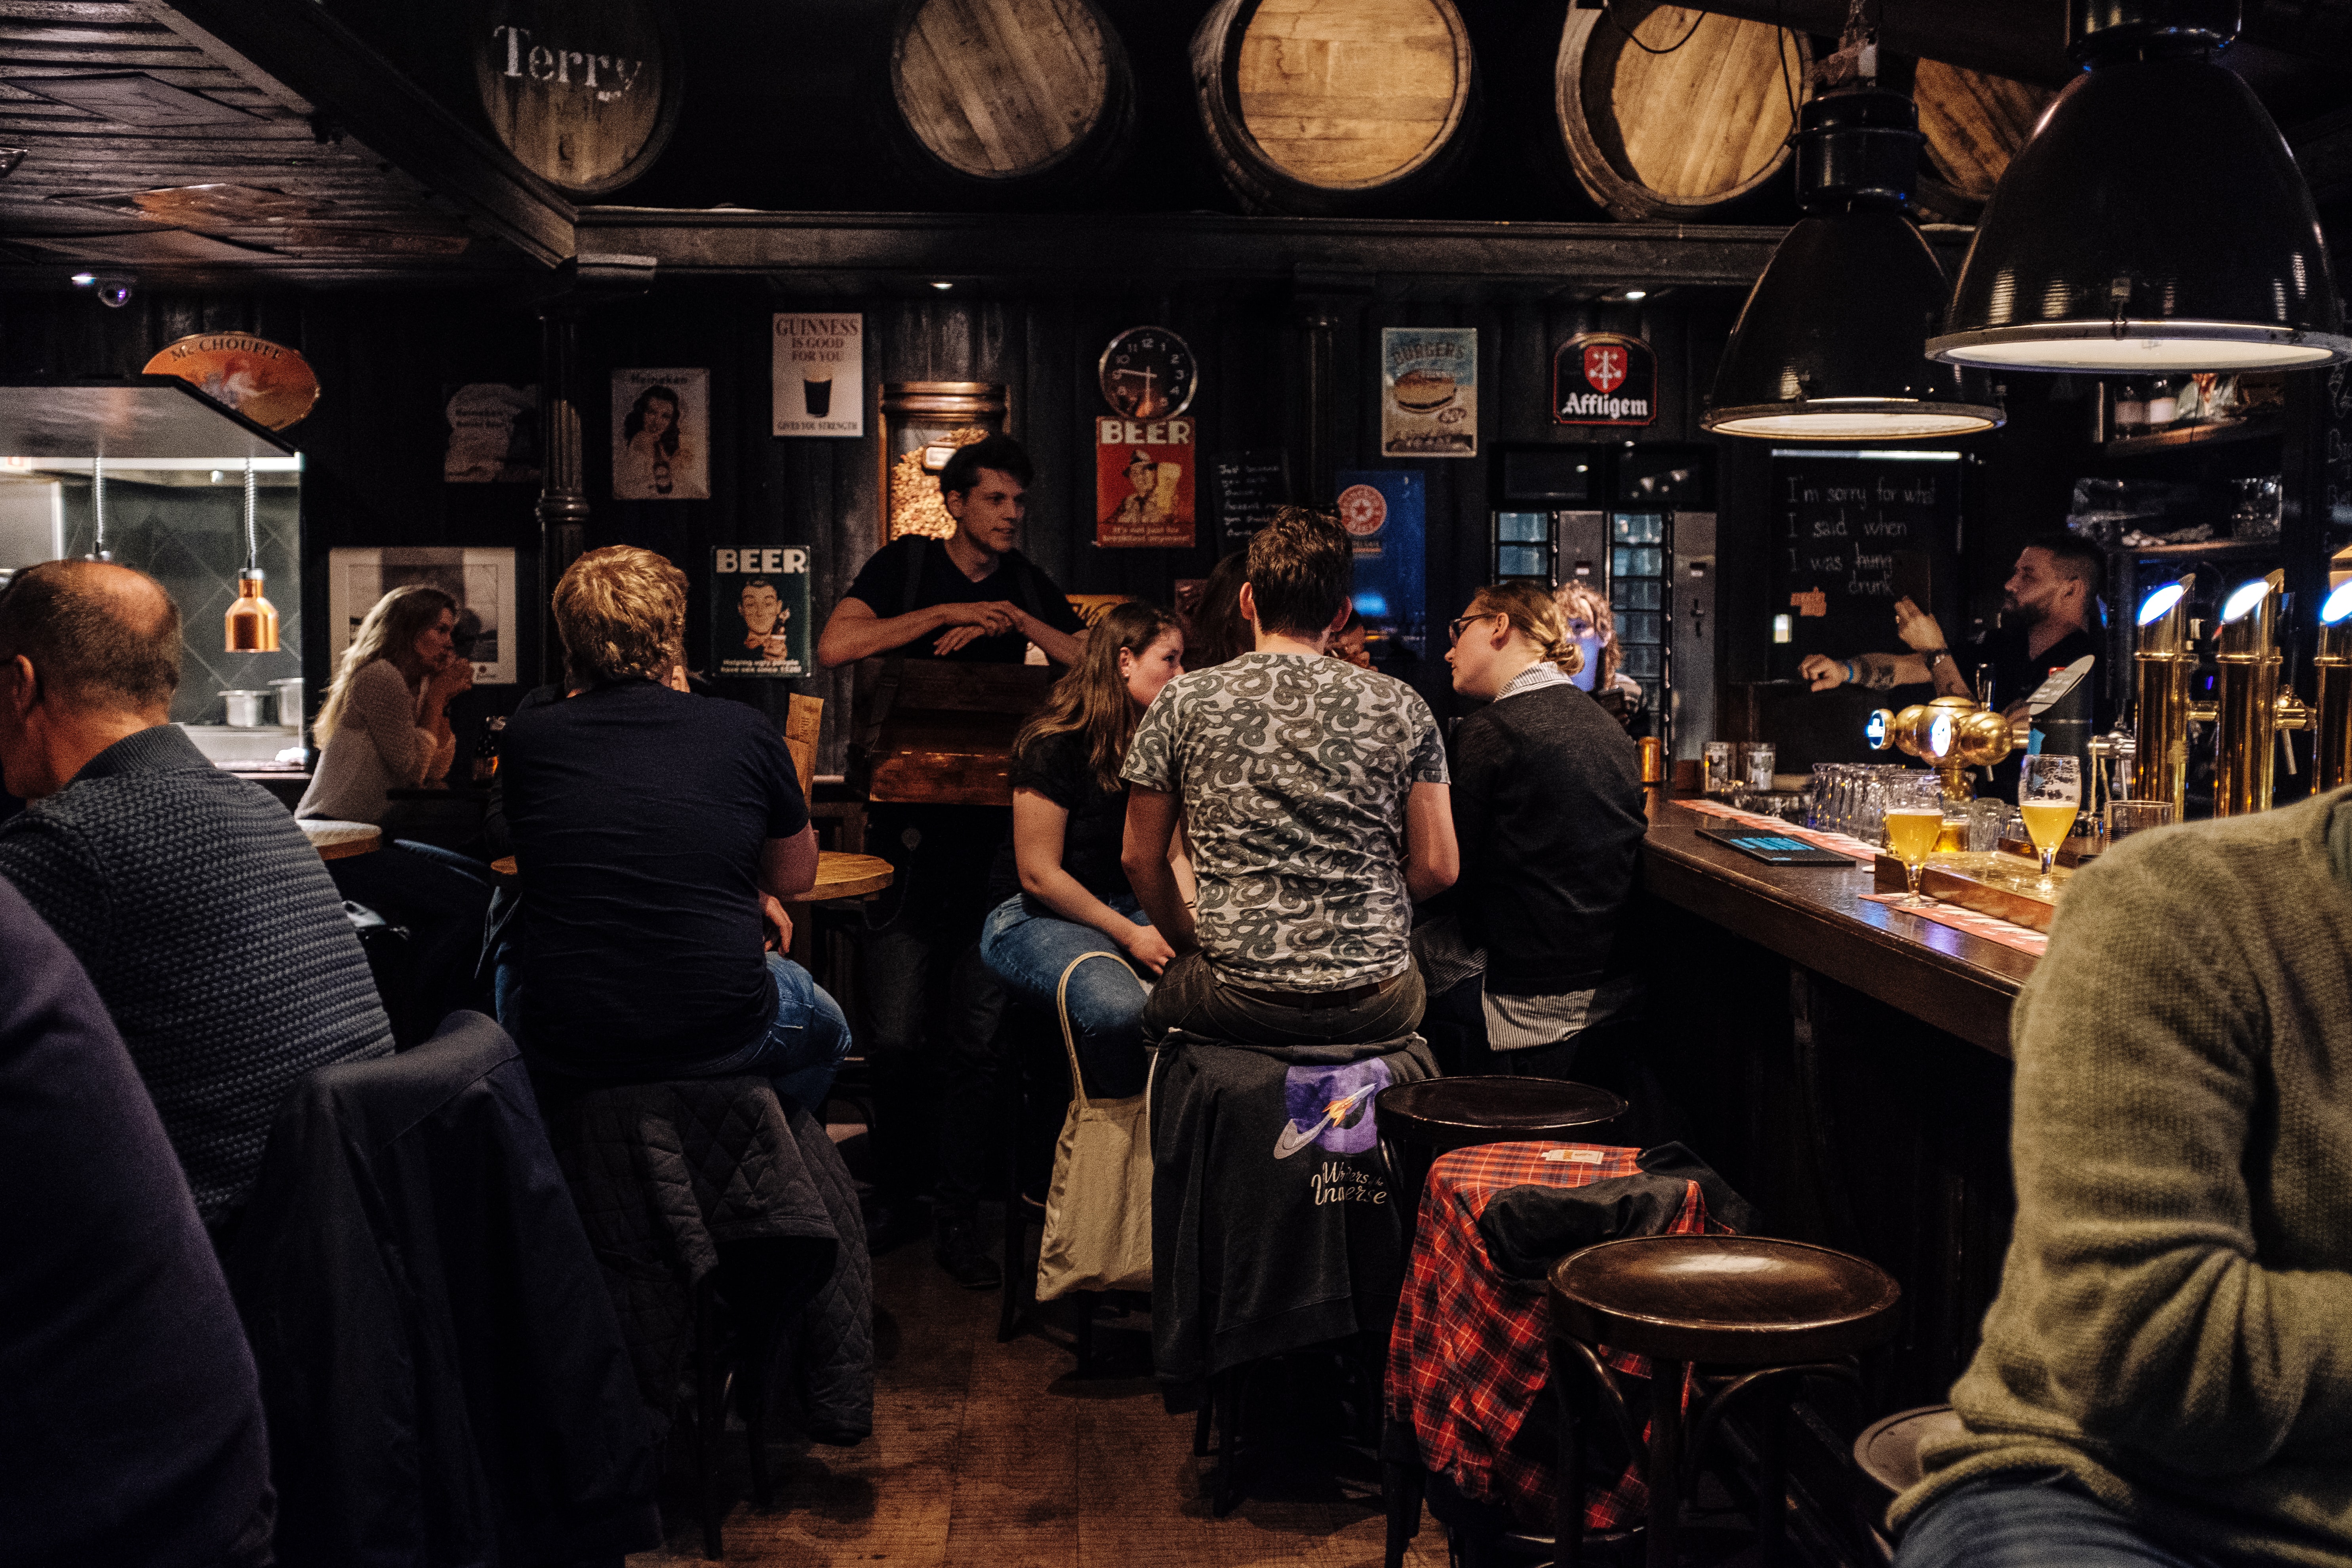 Photo of people sitting in a bar, chatting with one another. Their coats are draped over the barstools upon which patrons are sitting. The bar itself is on the right, with the bartender using a tap to pour a beer. The walls are covered in dark wood paneling with signs advertising different beers like Guinness. Above the seating area, wooden barrels are used as decoration.